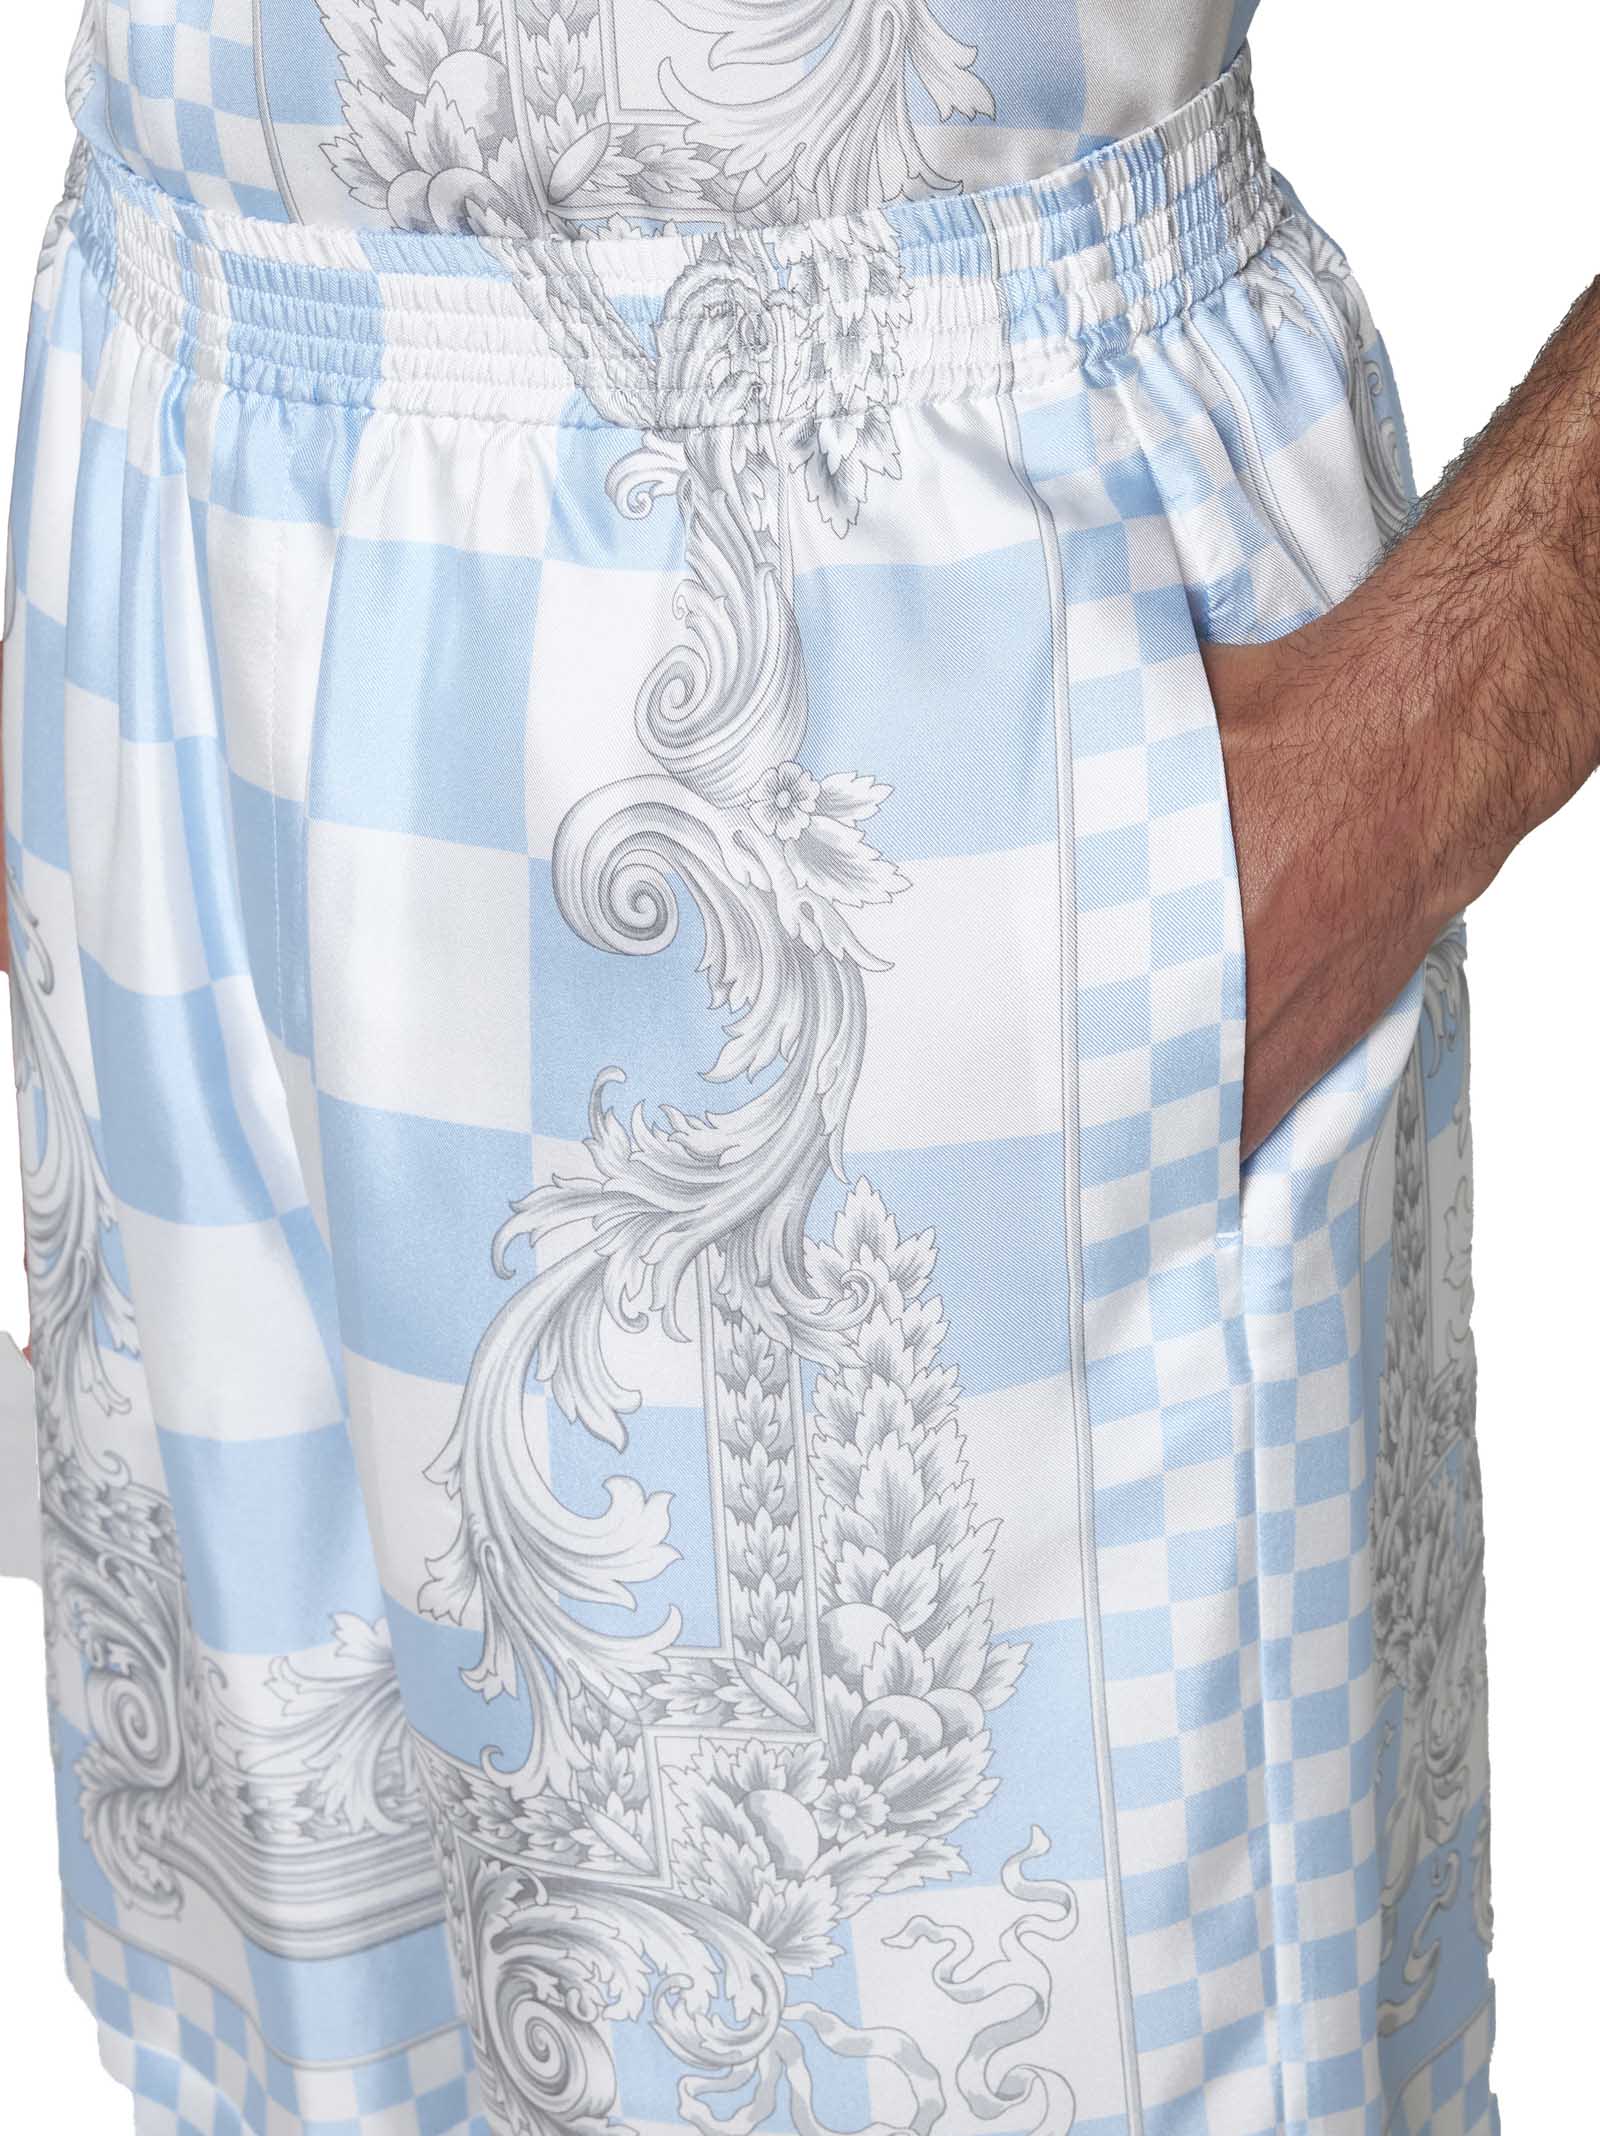 Shop Versace Shorts In Pastel Blue+white+silver